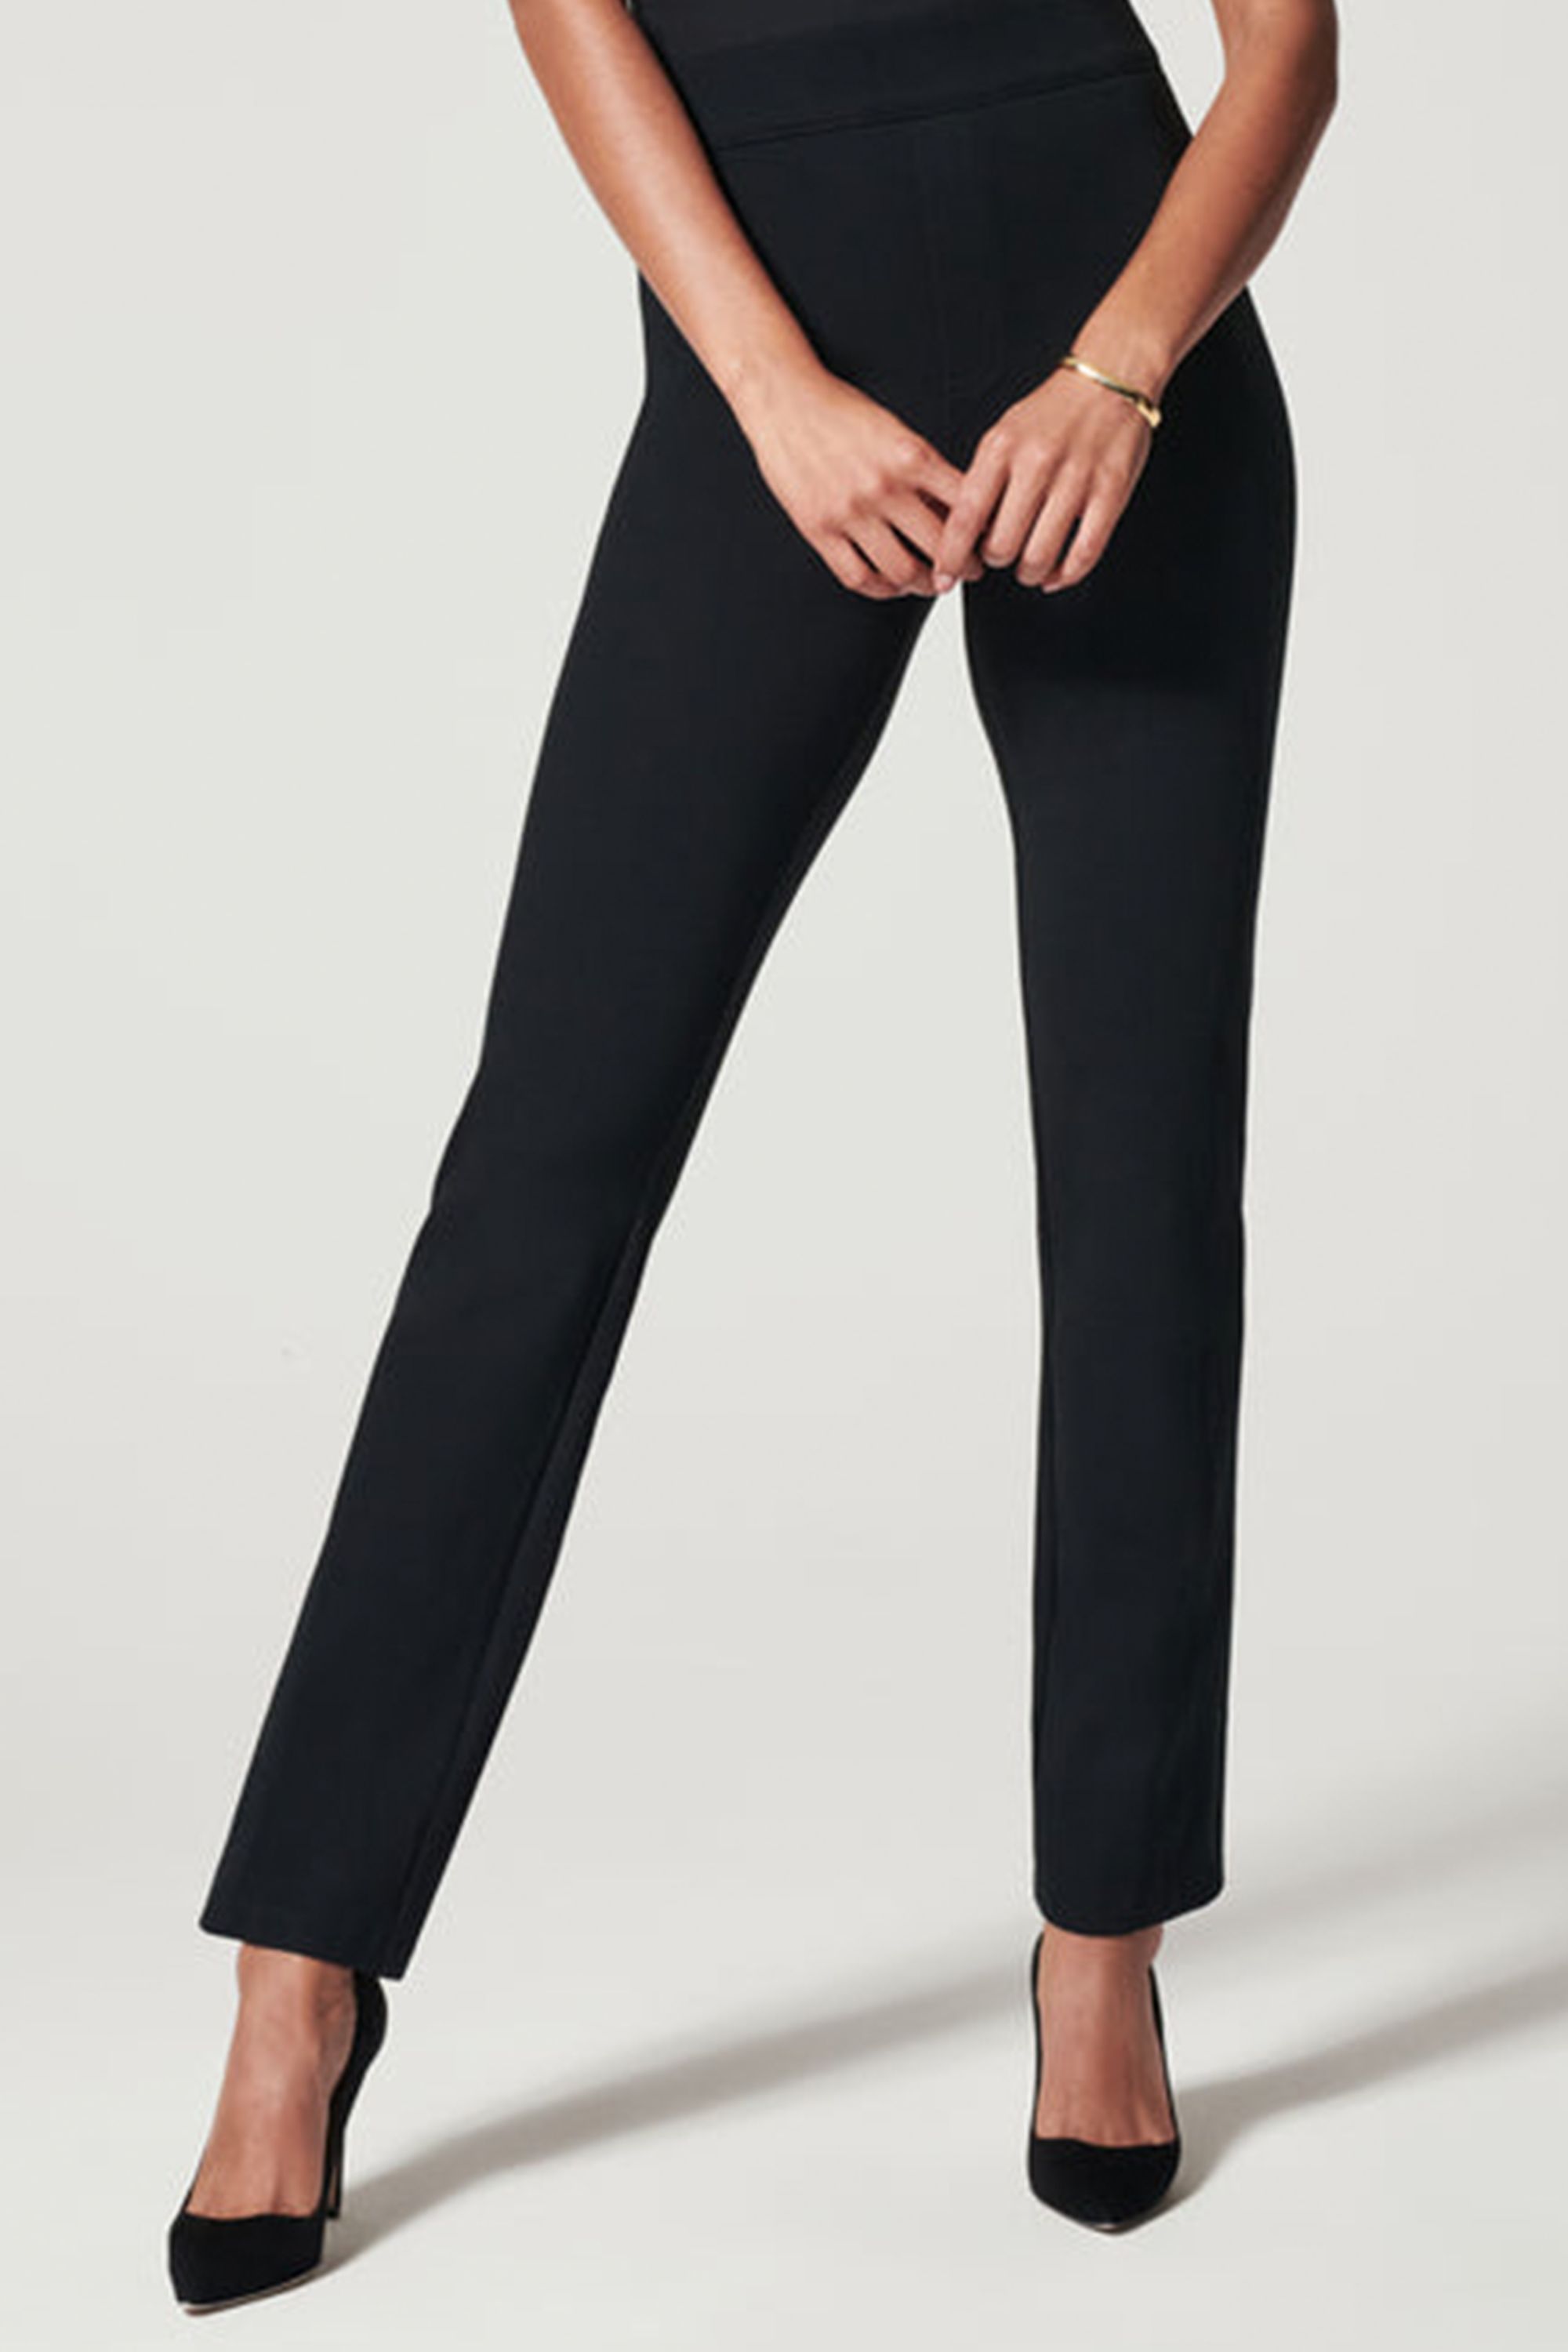 15 Comfortable, Office-Appropriate Pants to Get You Through the Workday